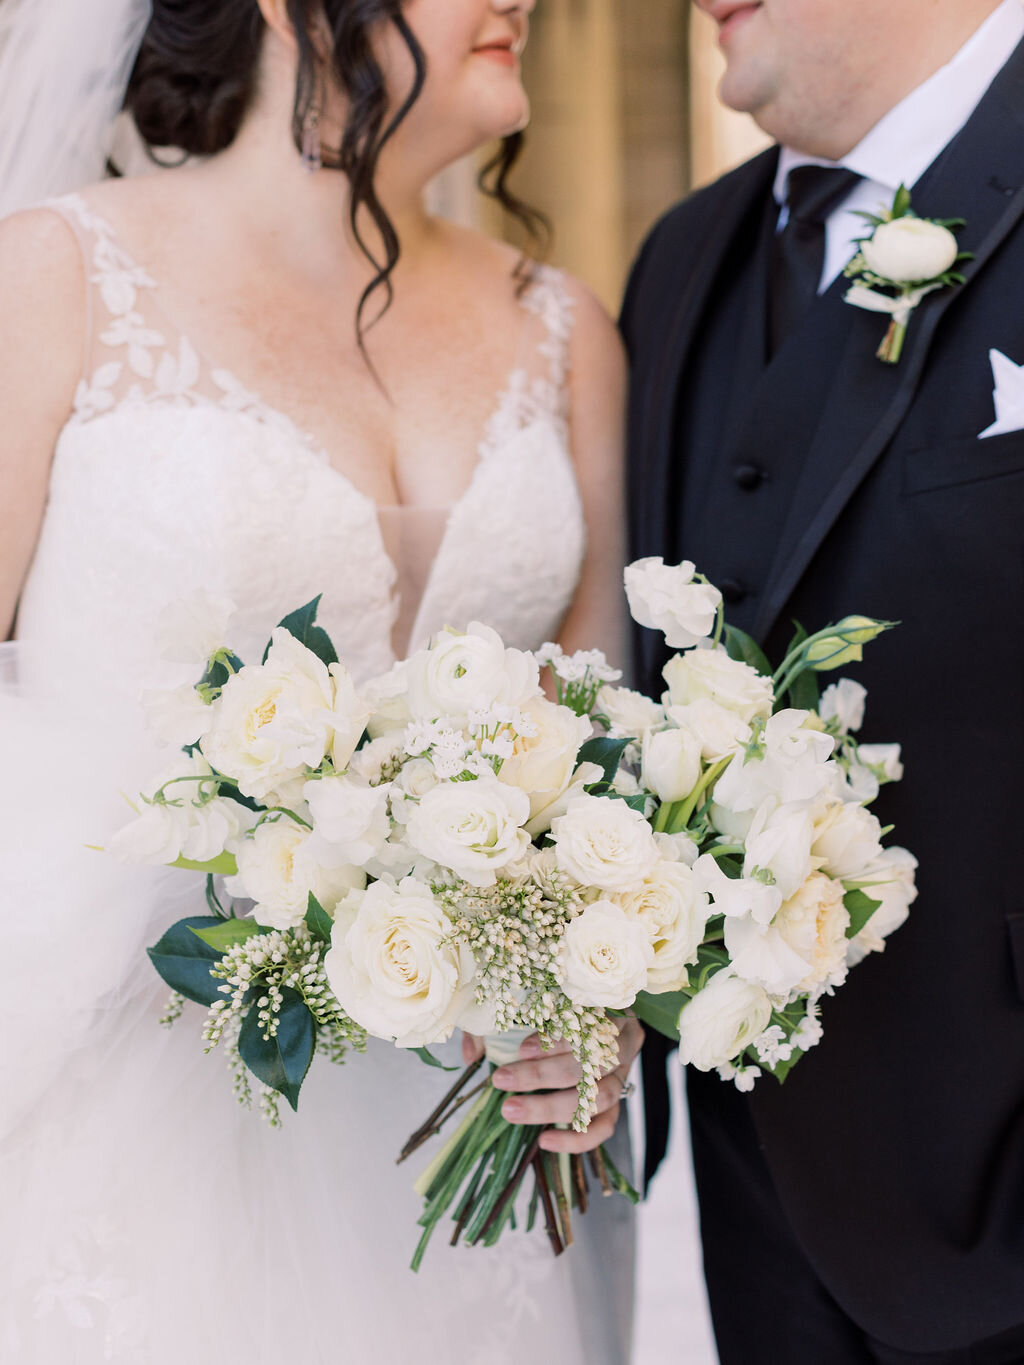 This wintery bridal bouquet is filled with white ice roses, fluffy ranunculus, draping pieris, majolica spray roses, white sweet pea, ivory lisianthus, and patience garden rose. Designed by florist Rosemary & Finch in Nashville, TN.